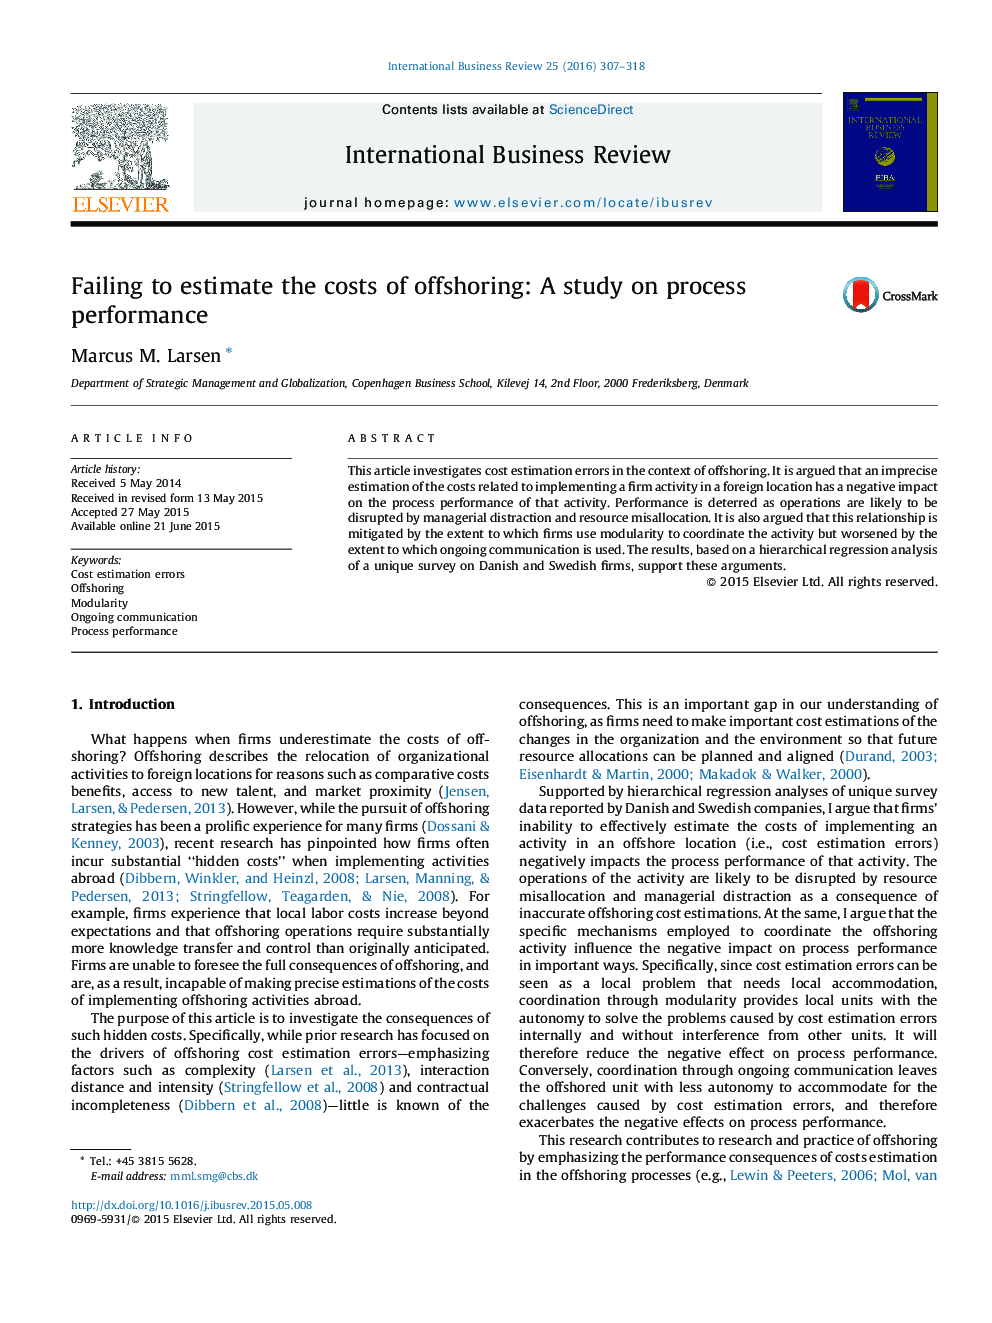 Failing to estimate the costs of offshoring: A study on process performance